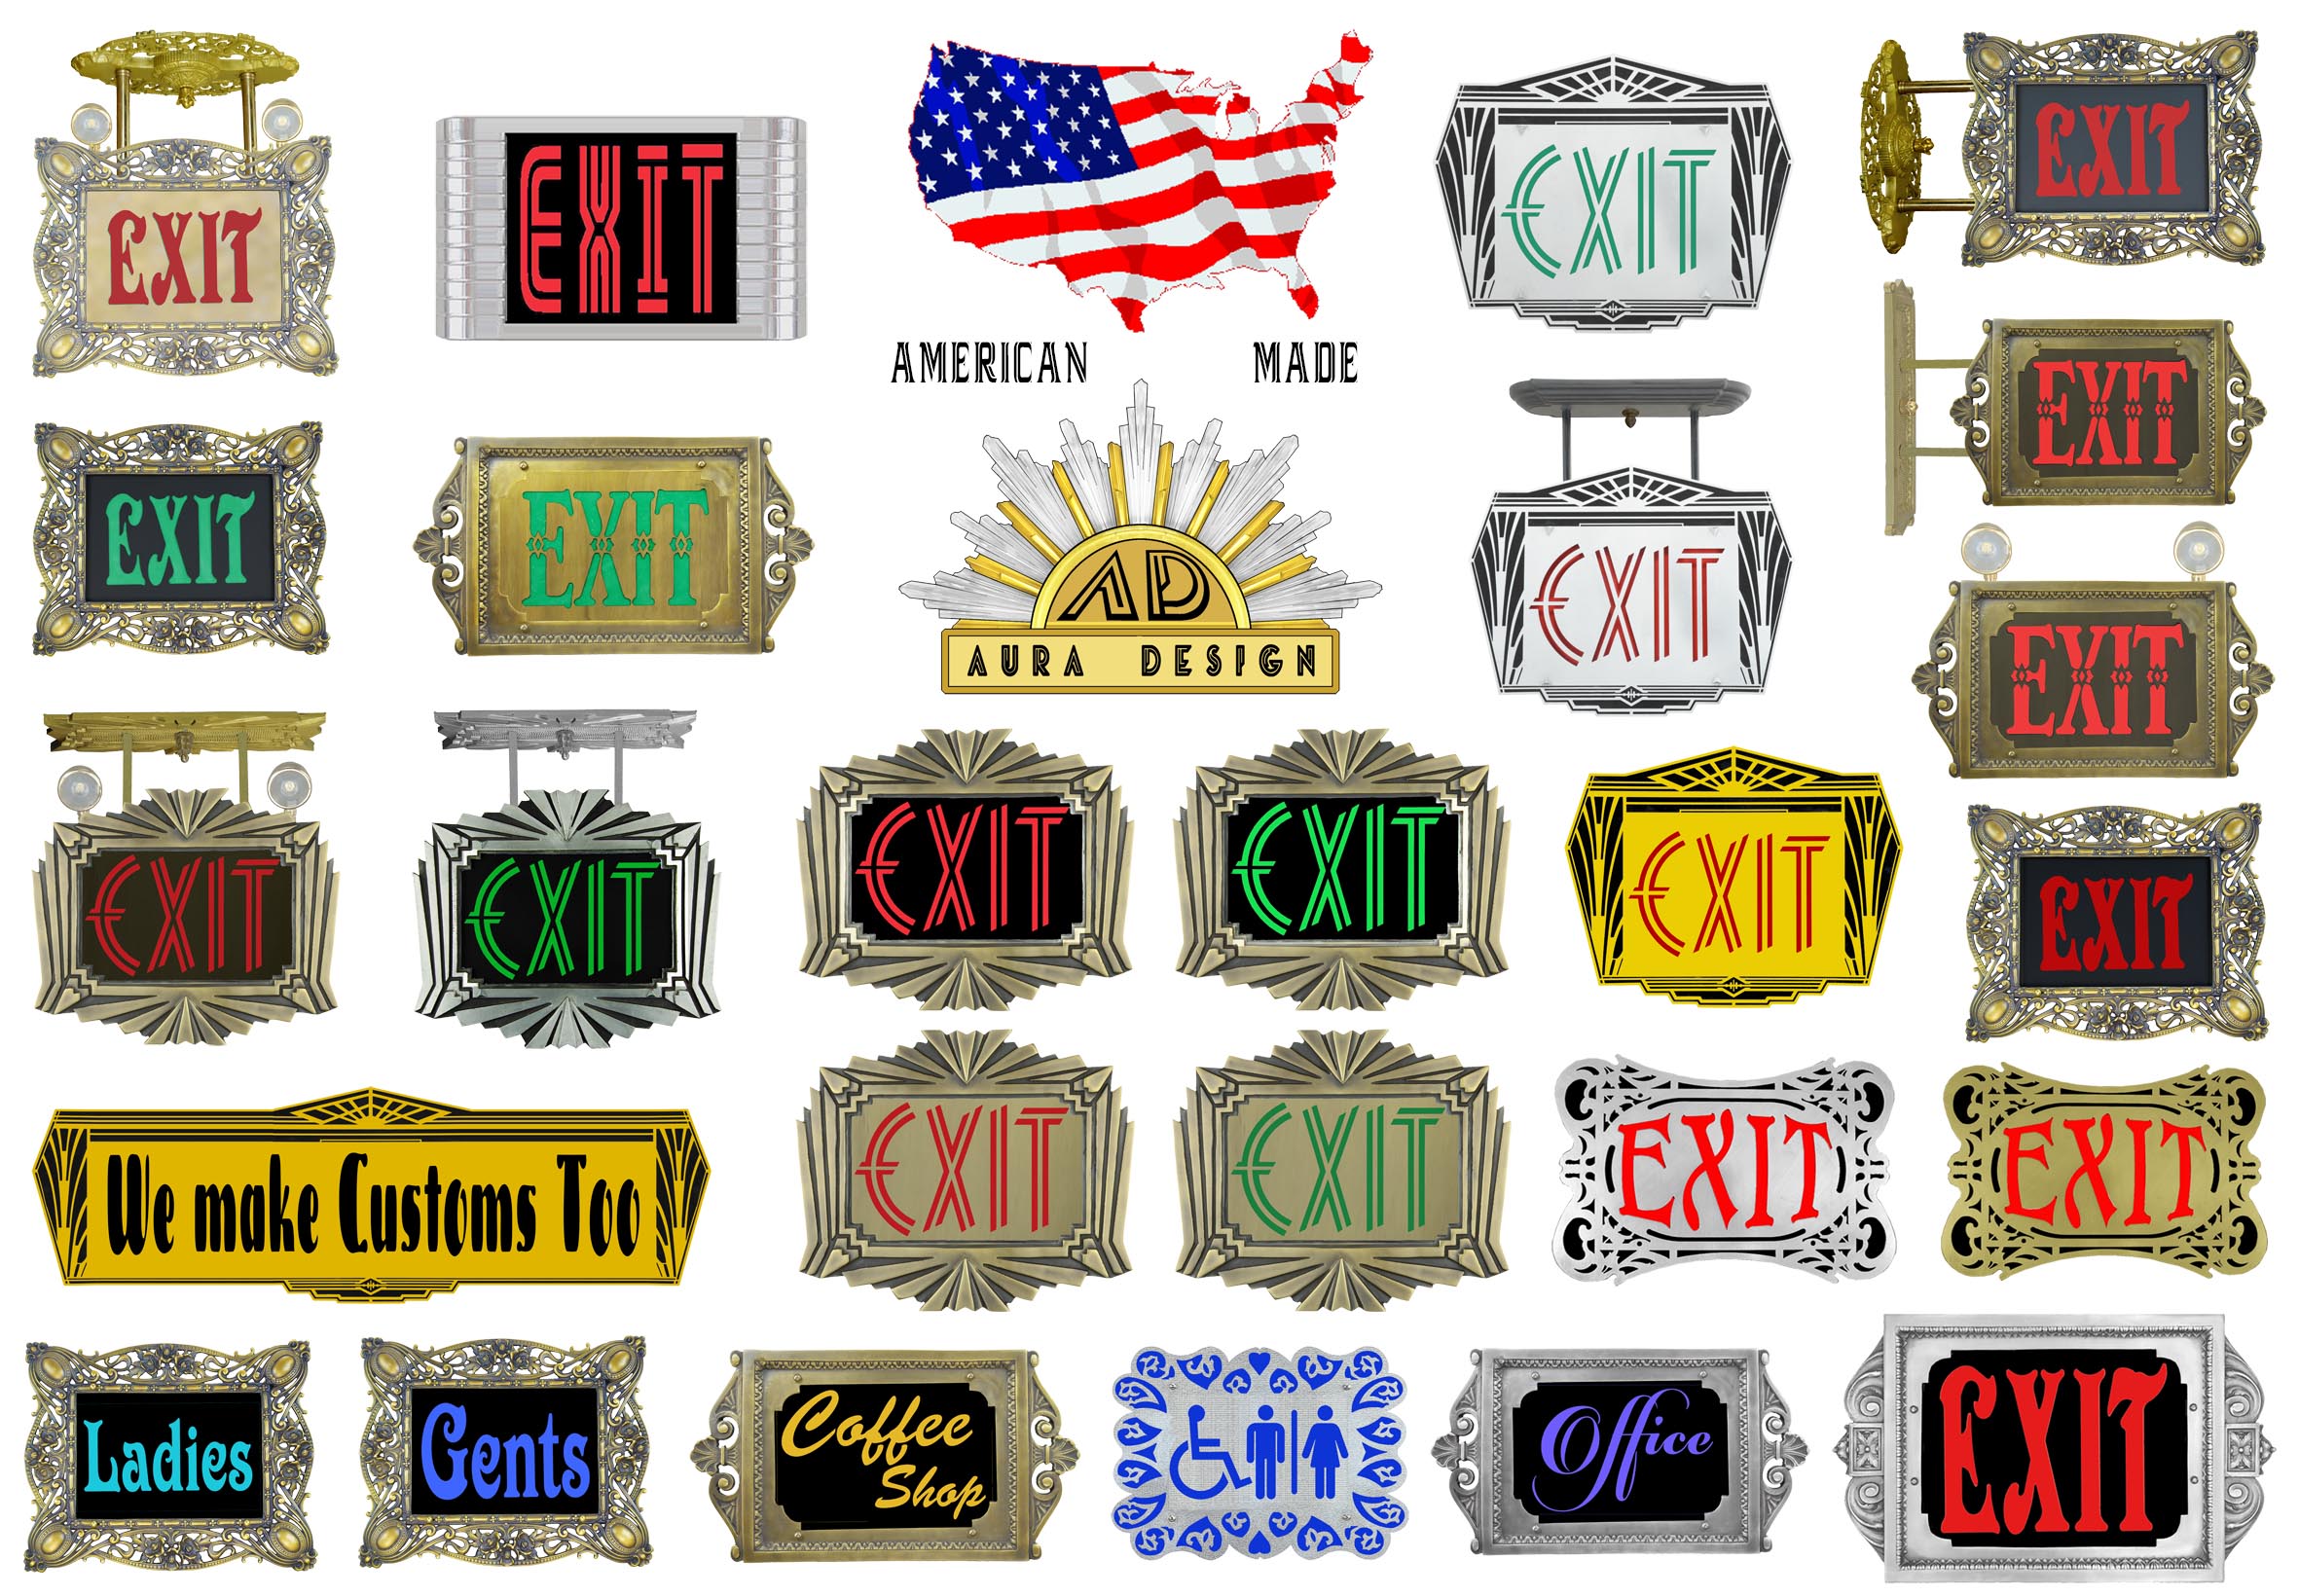 Assortment of custom and preconfigured exit Signs